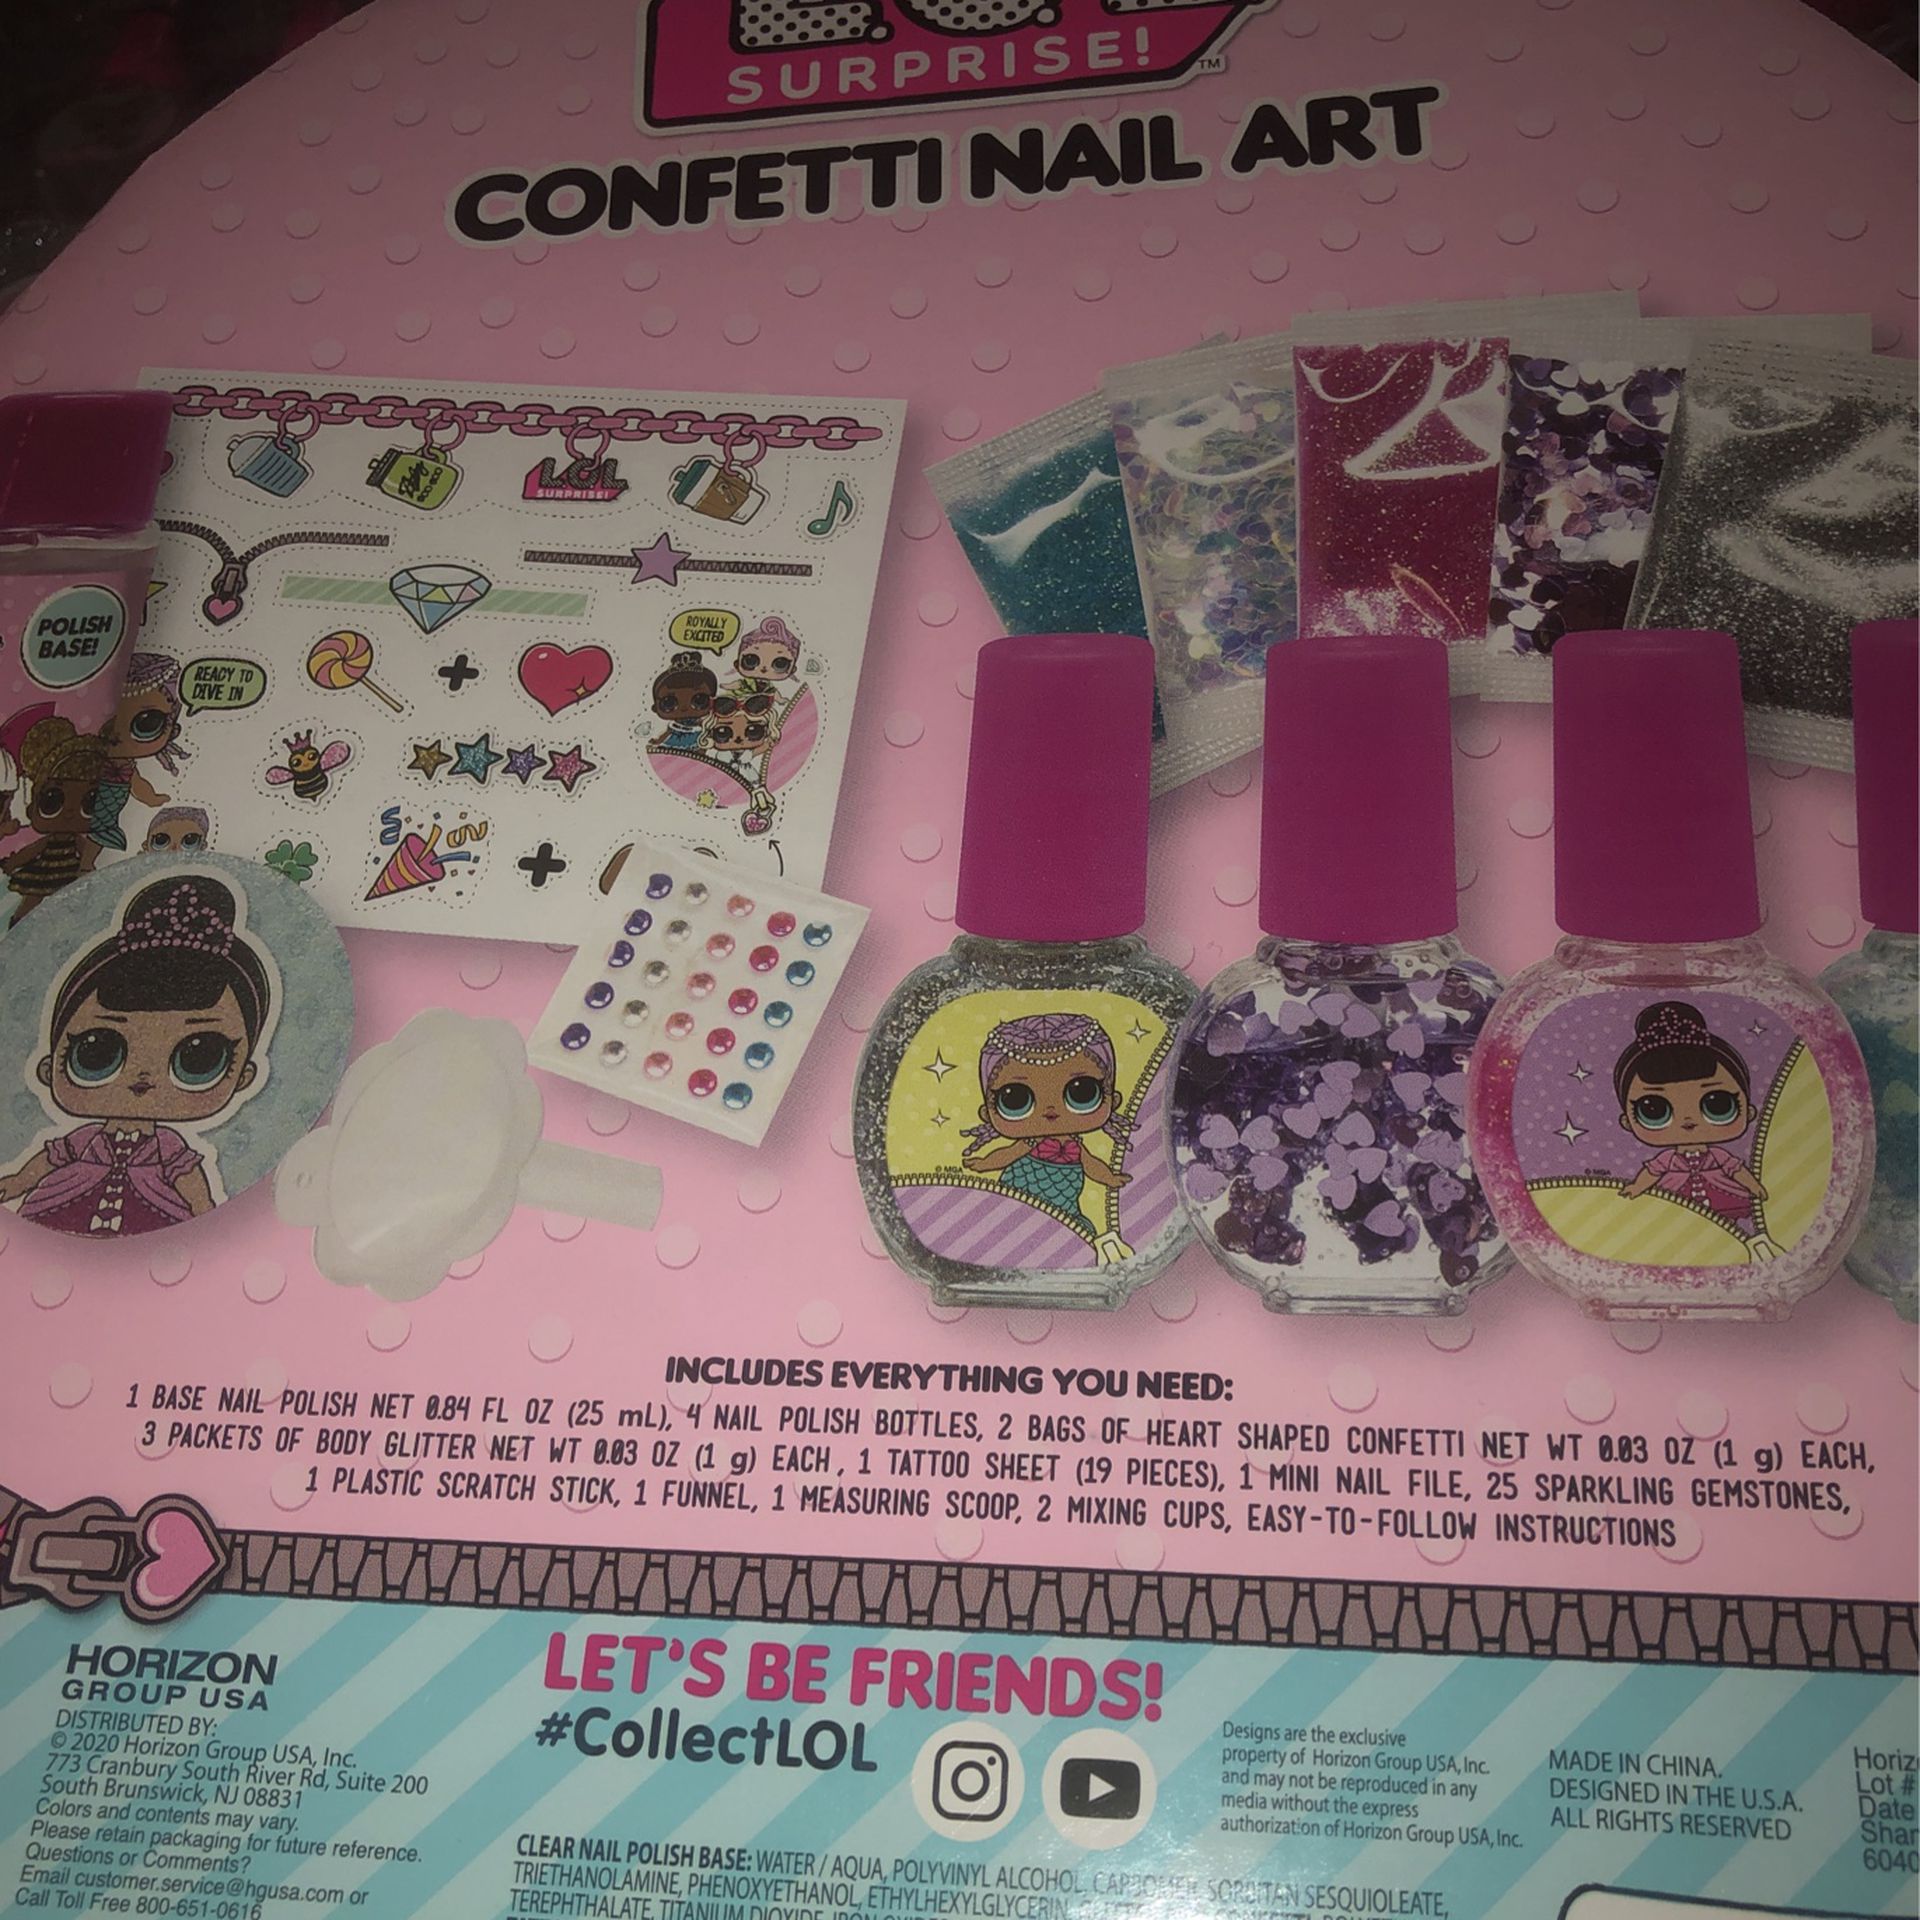 L.O.L. SURPRISE GIFTS!!! AVAILABLE FOR THIS CHRISTMAS HOLIDAYS . L.O.L HAIRGOALS $17, CONFETTI NAIL ART $12 . L.O.L. CONFETTI UNDER WRAPS $25